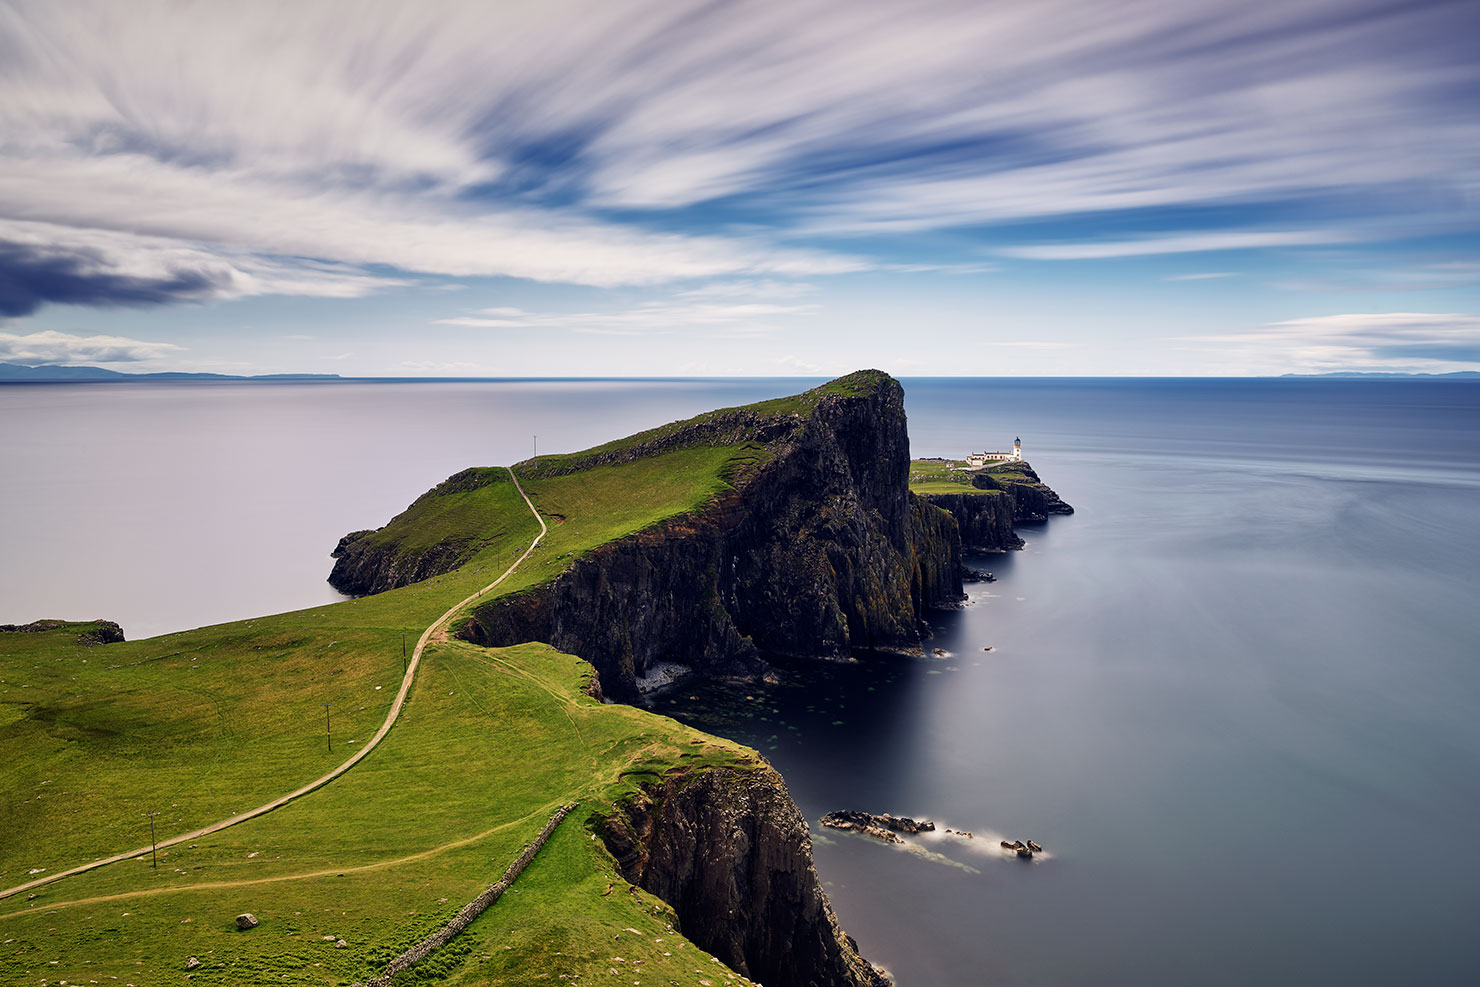 Neist Point Lighthouse Automatic Frame Averaging AFA IQ4 Lights paul reiffer phase one long exposure guide free ebook interactive lessons video download photography landscape